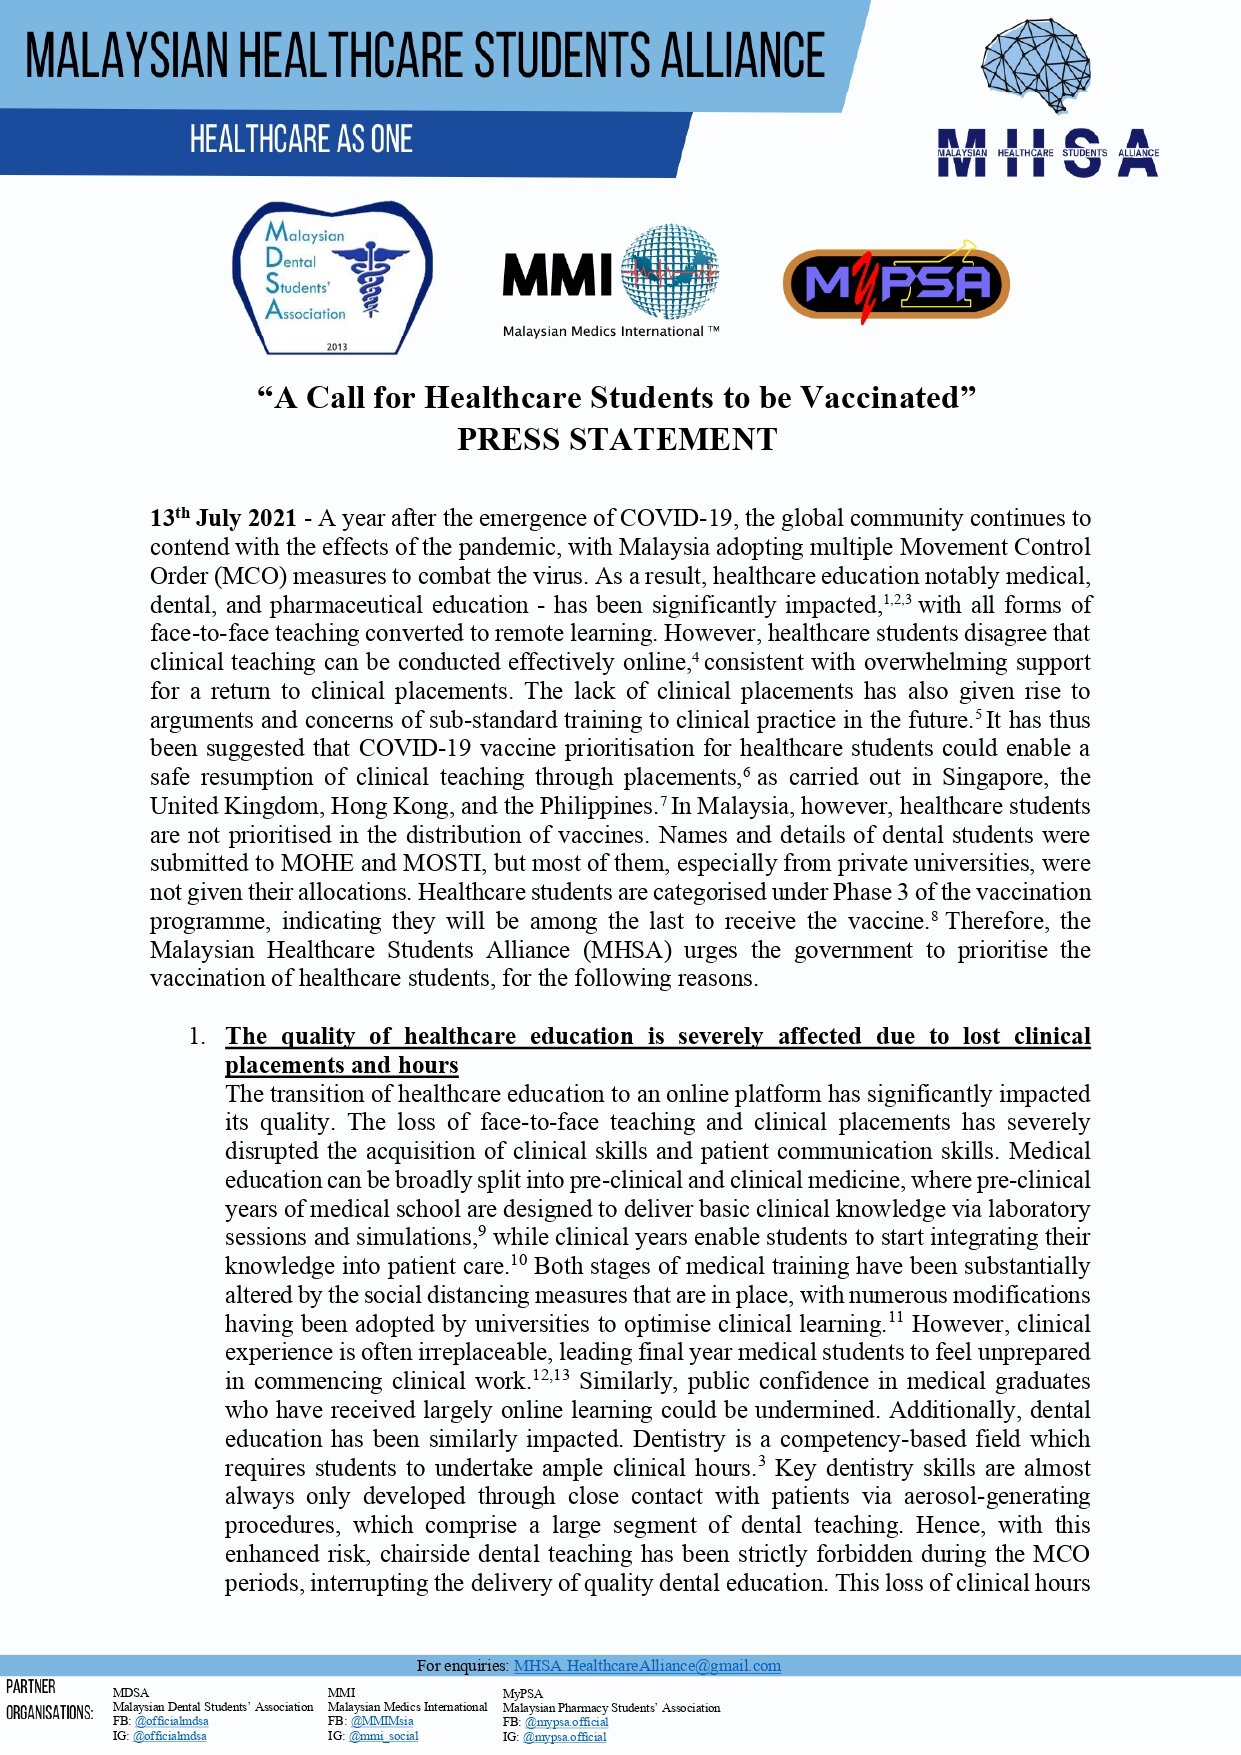 MHSA “A Call for Healthcare Students to be Vaccinated” Press Statement_page-0001.jpg